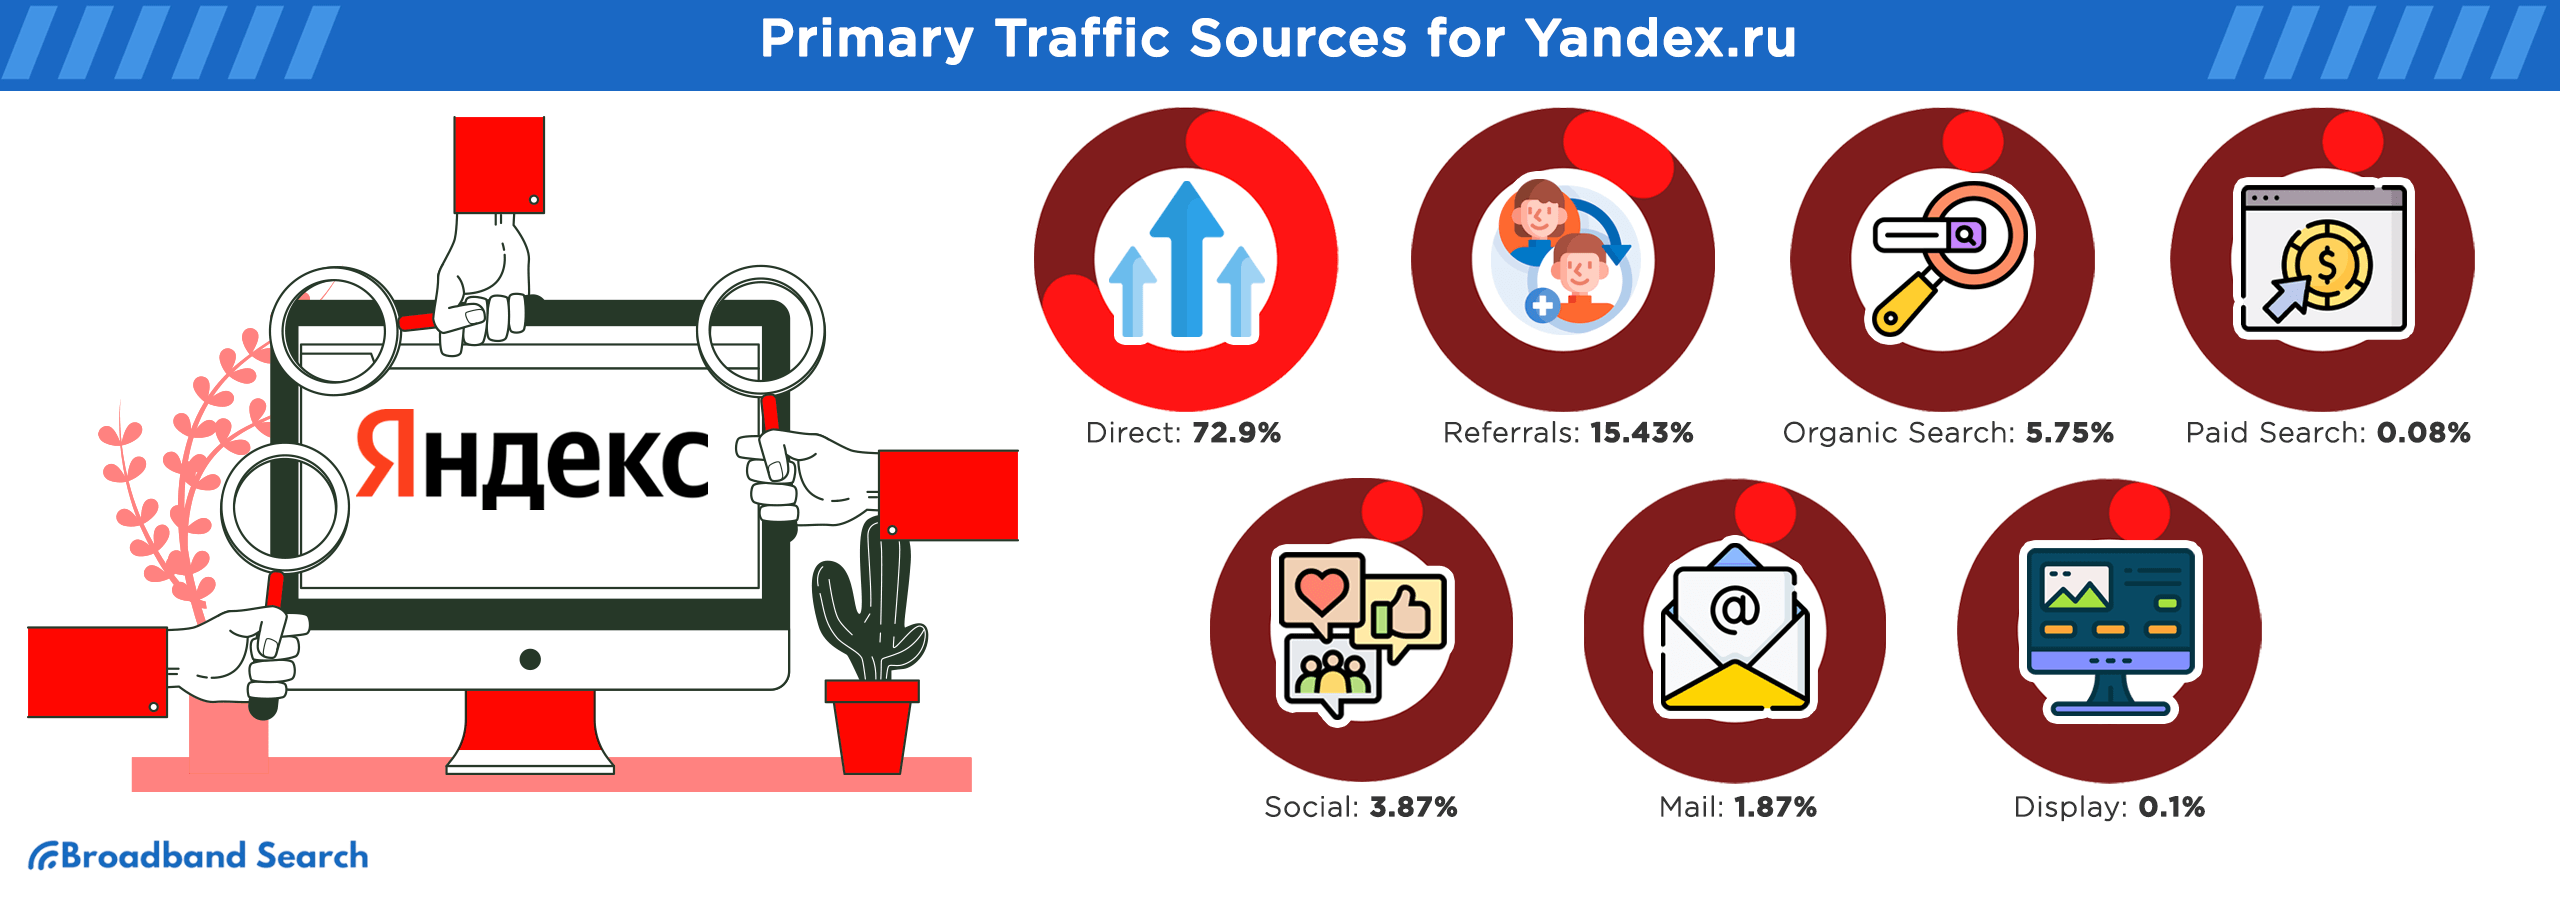 7 primary traffic sources for the browser Yandex.ru